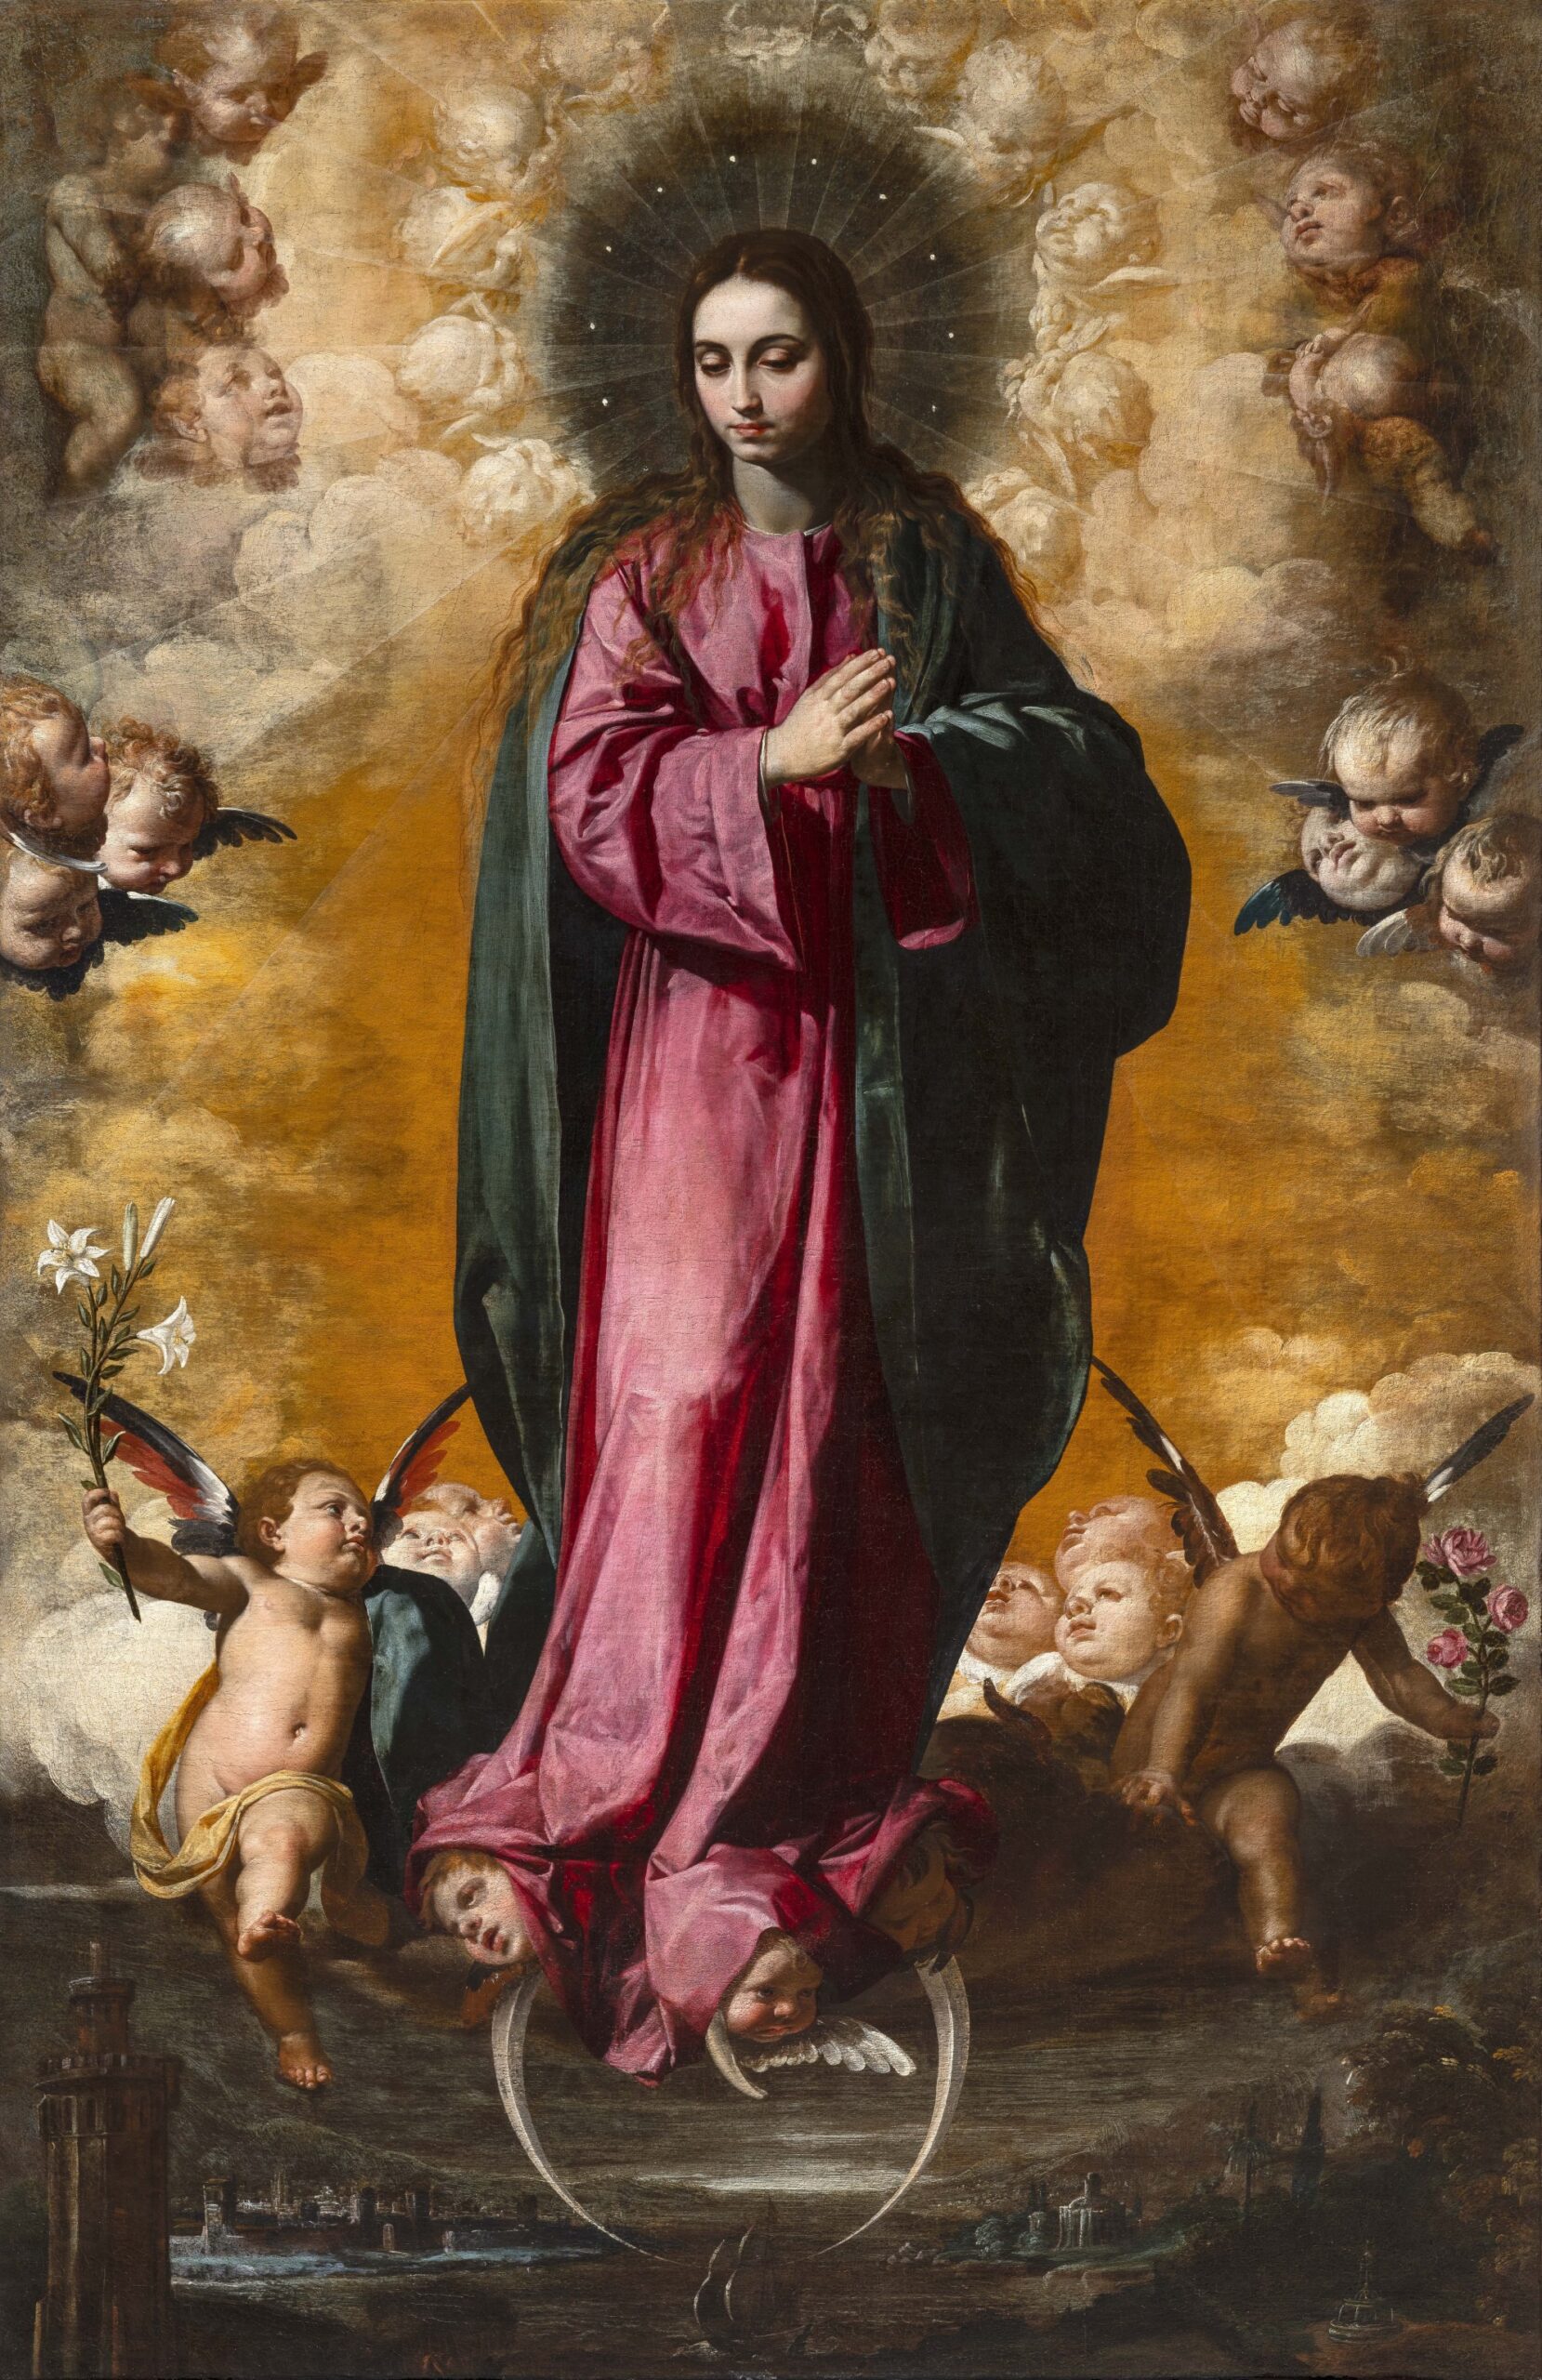 Alonso Cano (1601-1667), L’Immaculée Conception, vers 1628. Huile sur toile, 148,7 x 96 cm. Rob Smeets Gallery, Genève.